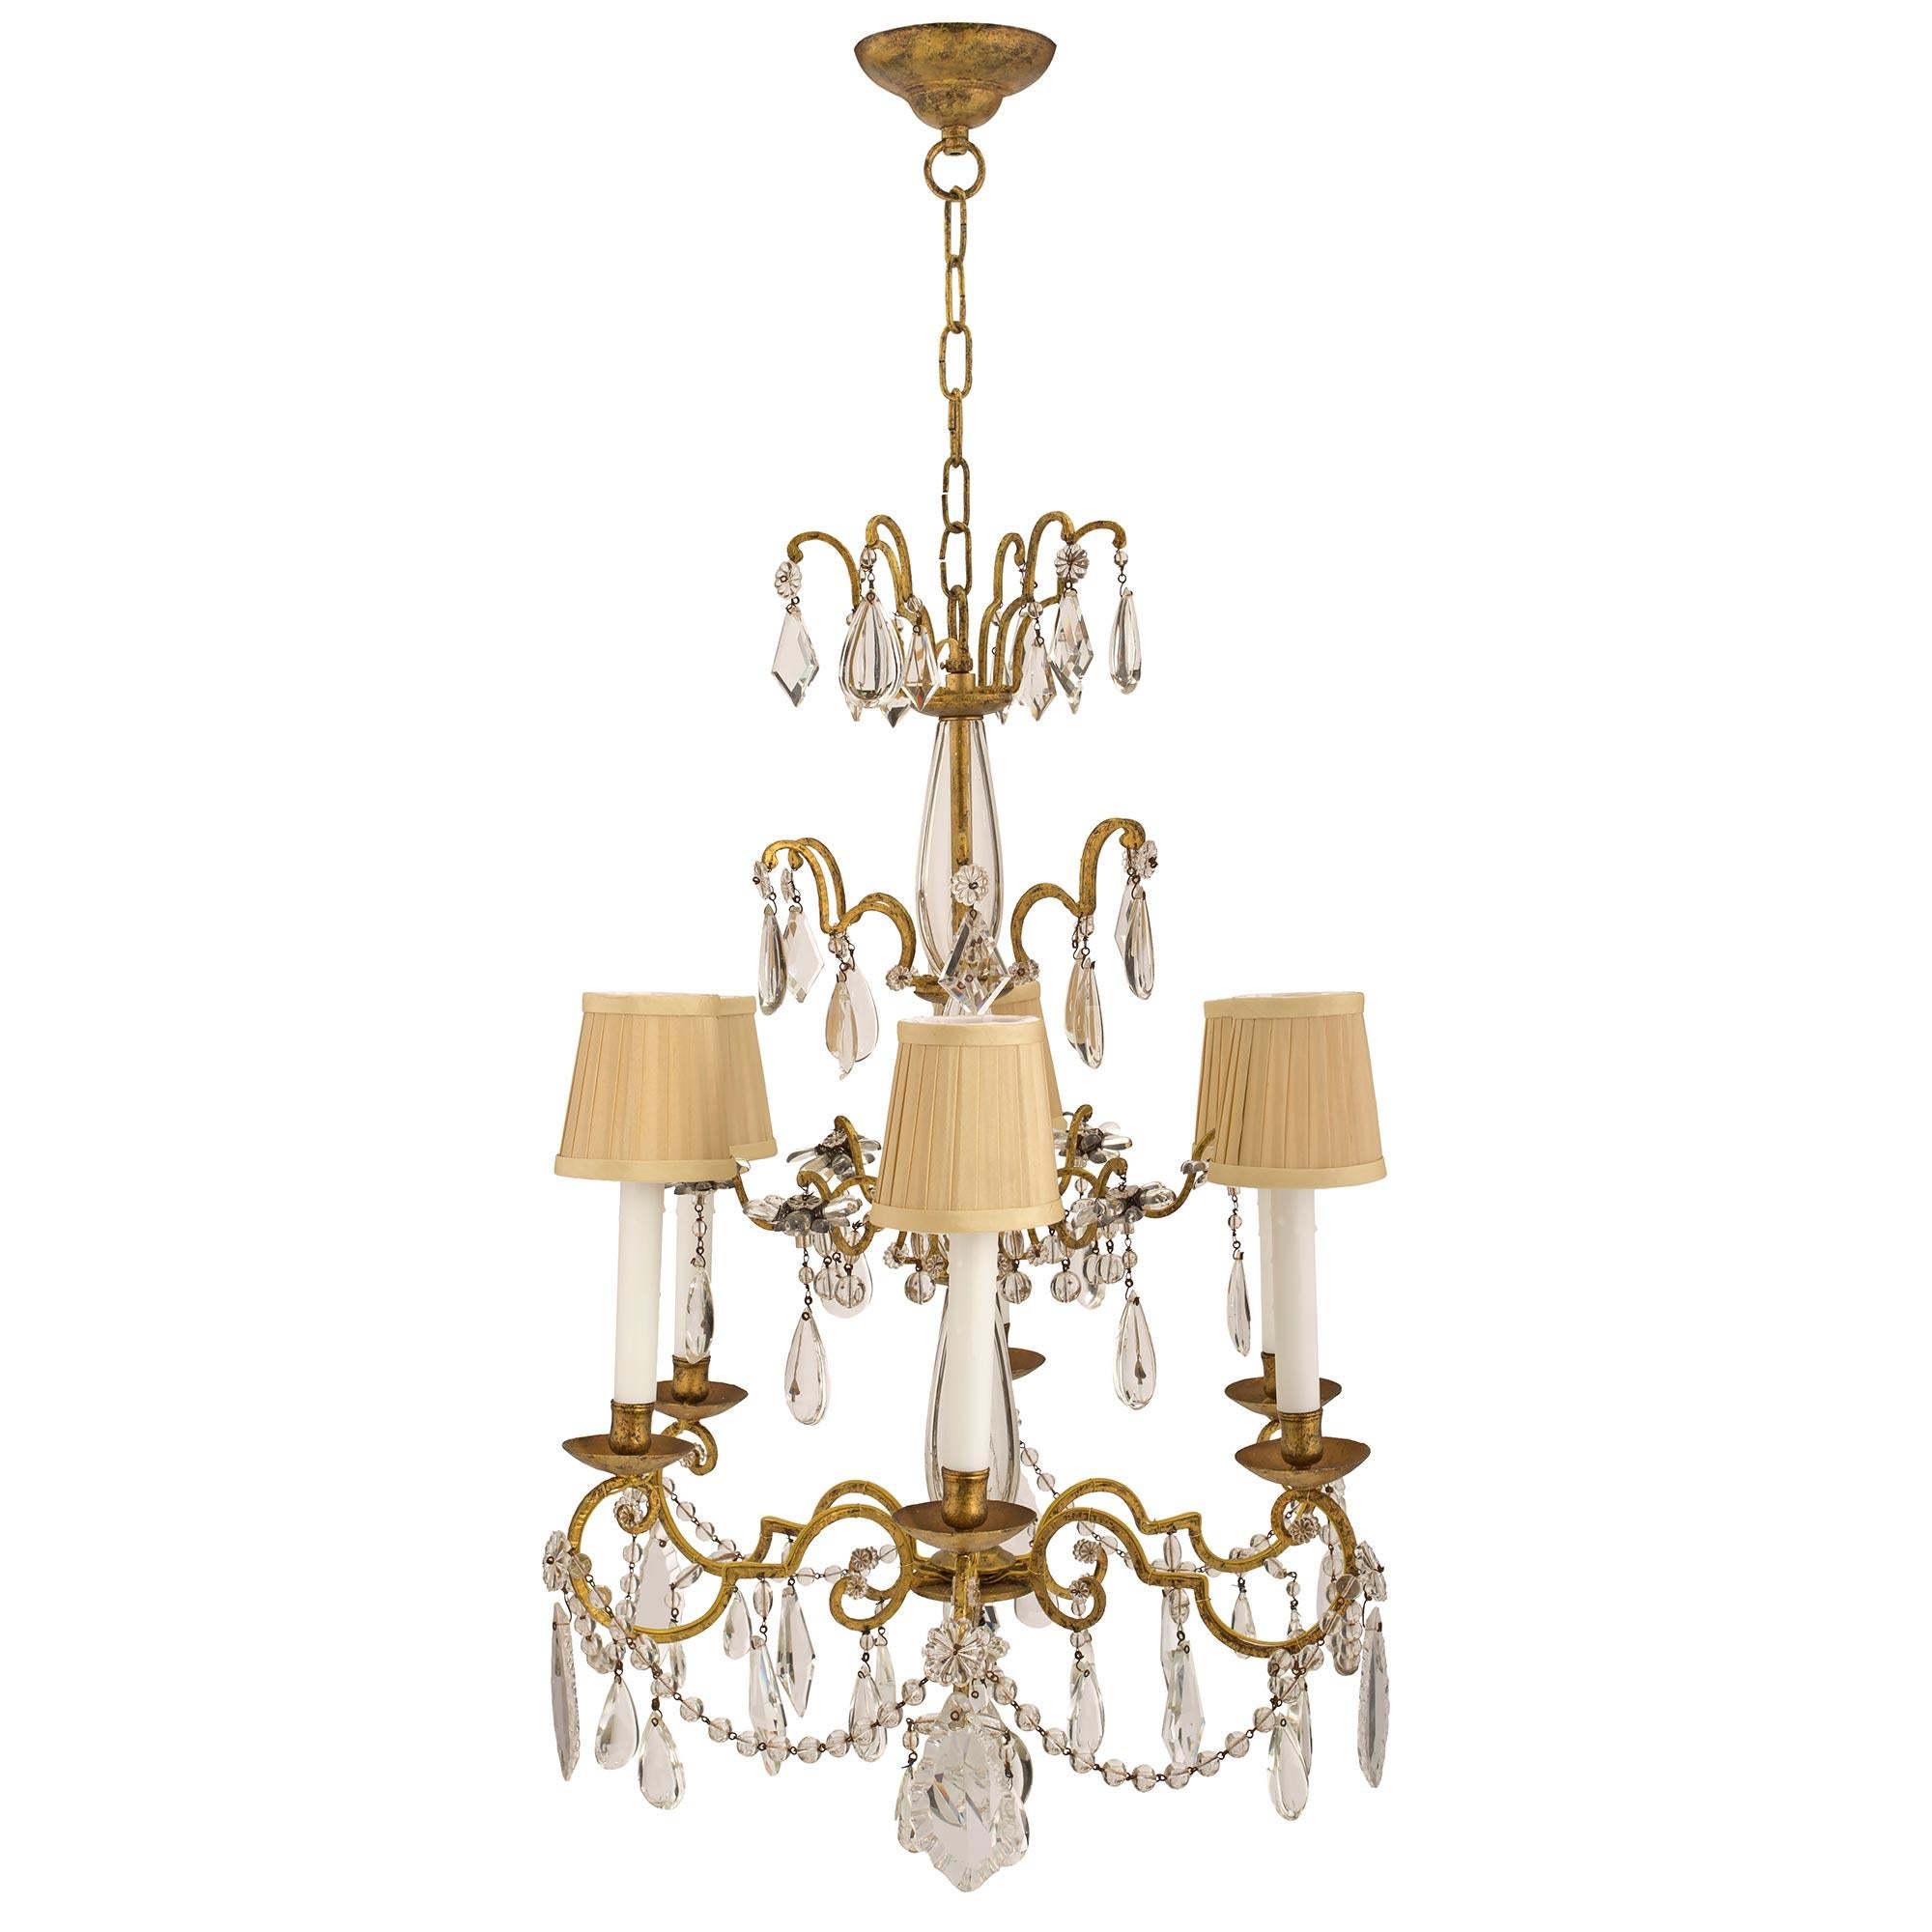 French Italian 19th Century Louis XV Style Gilt Iron Crystal and Glass Chandelier